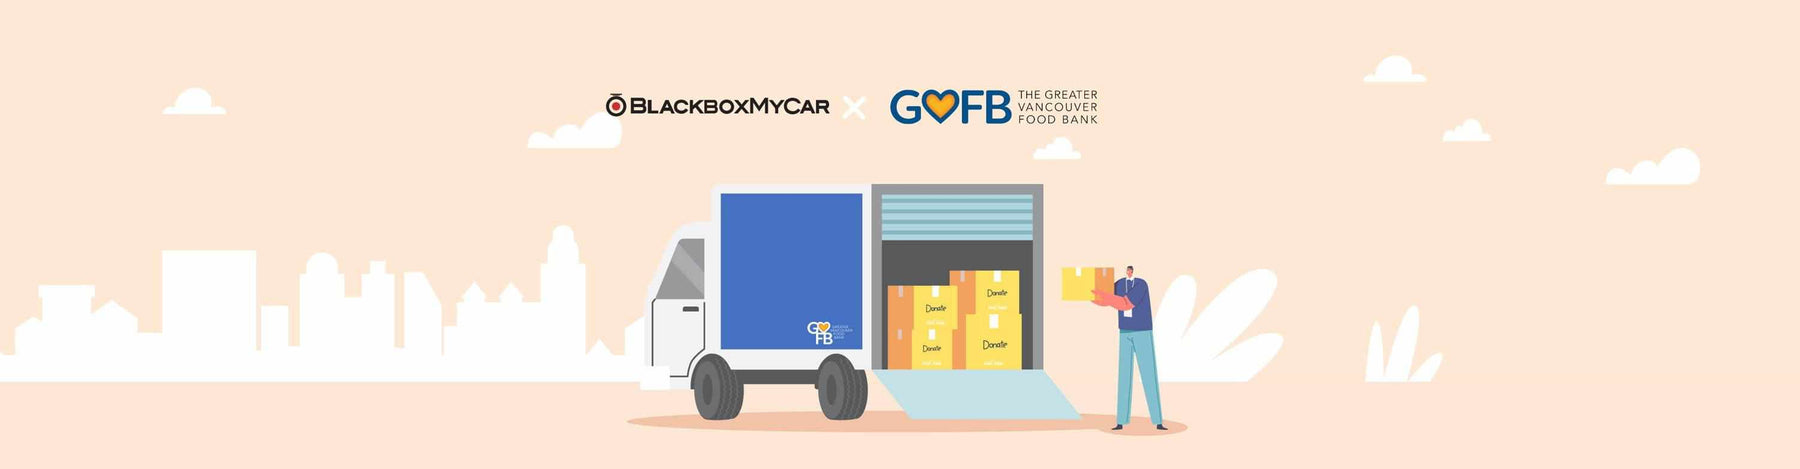 BlackboxMyCar | Helping Out In the Community - Greater Vancouver Food Bank - - BlackboxMyCar